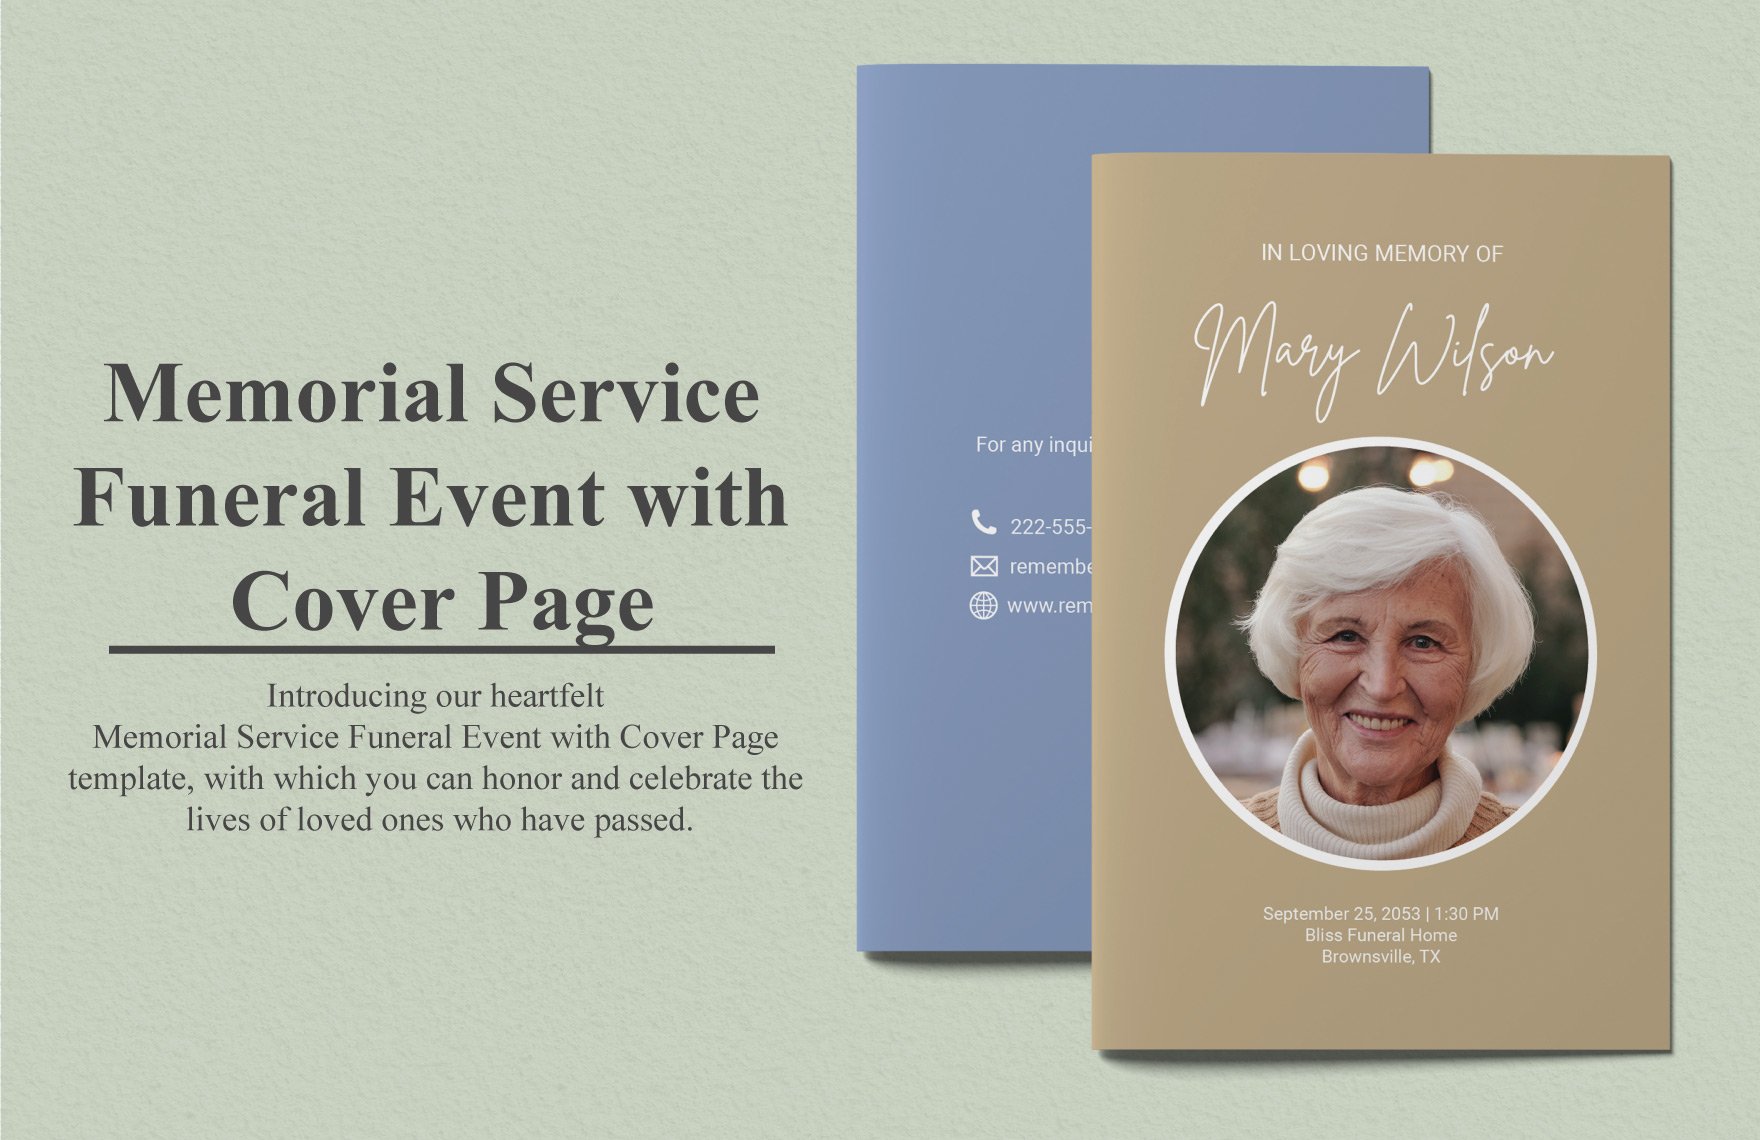 Memorial Service Funeral Event with Cover Page